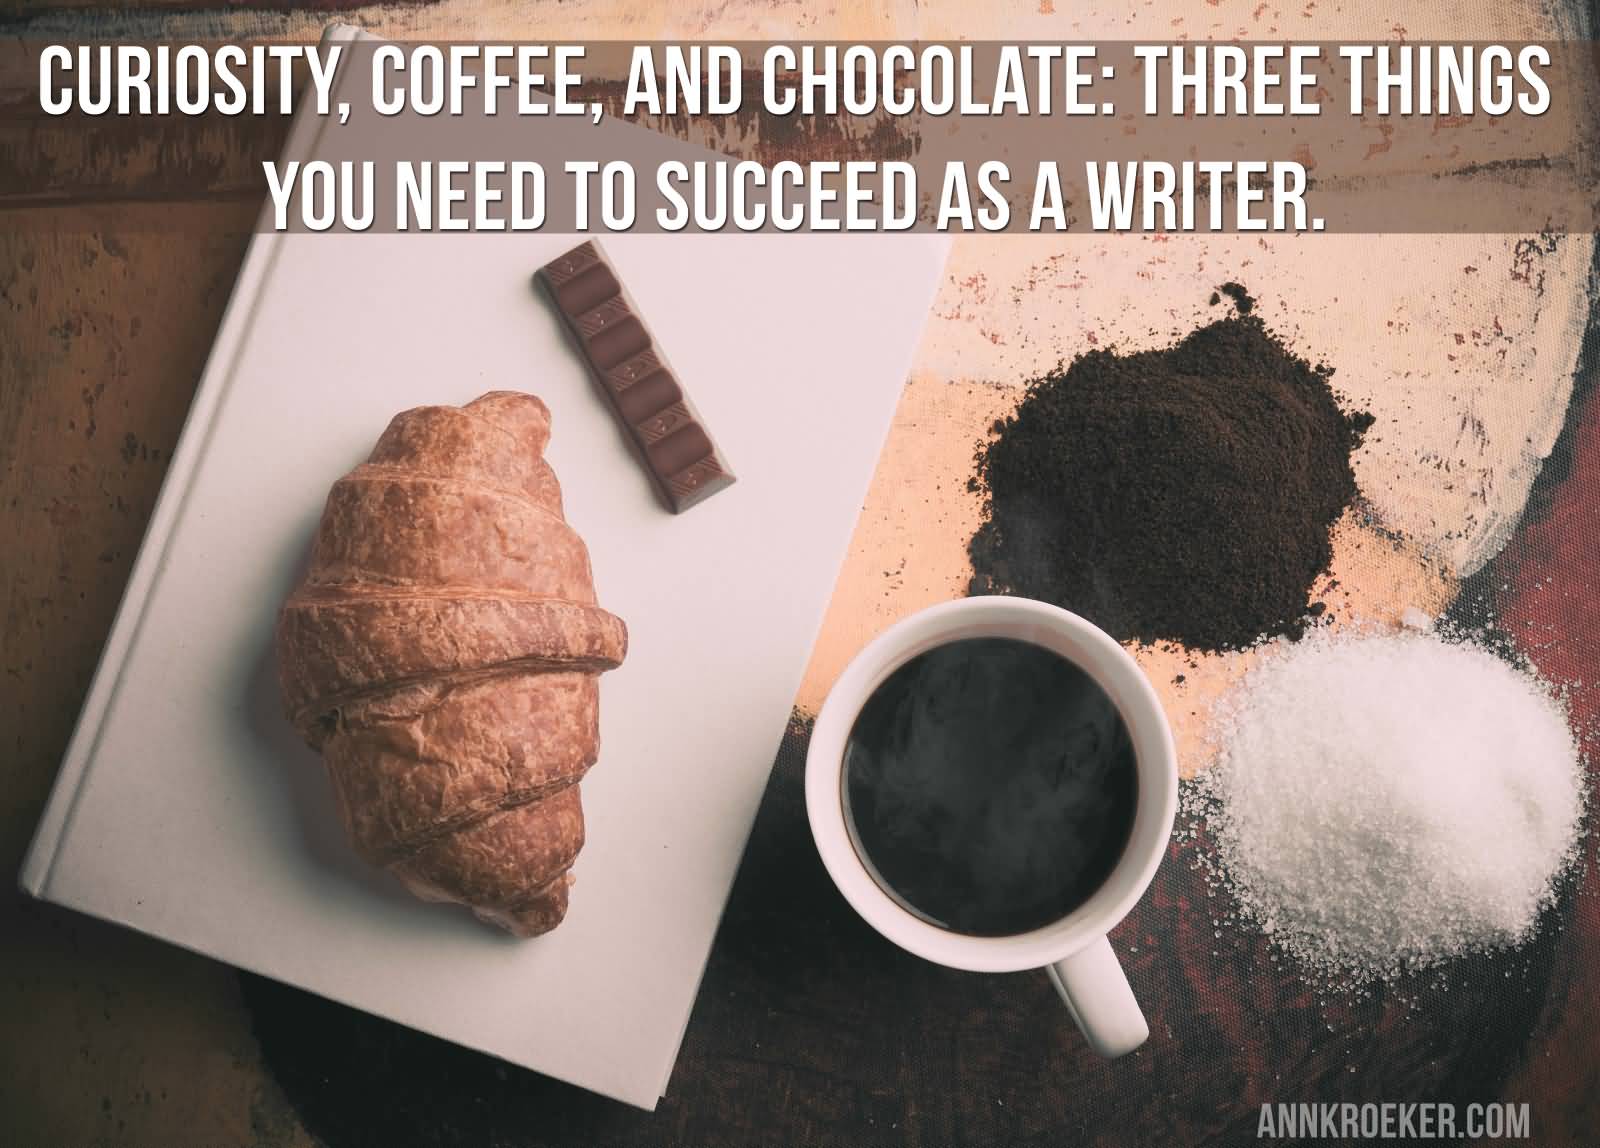 Curiosity, coffee, and chocolate three things you need to succeed as a writer.